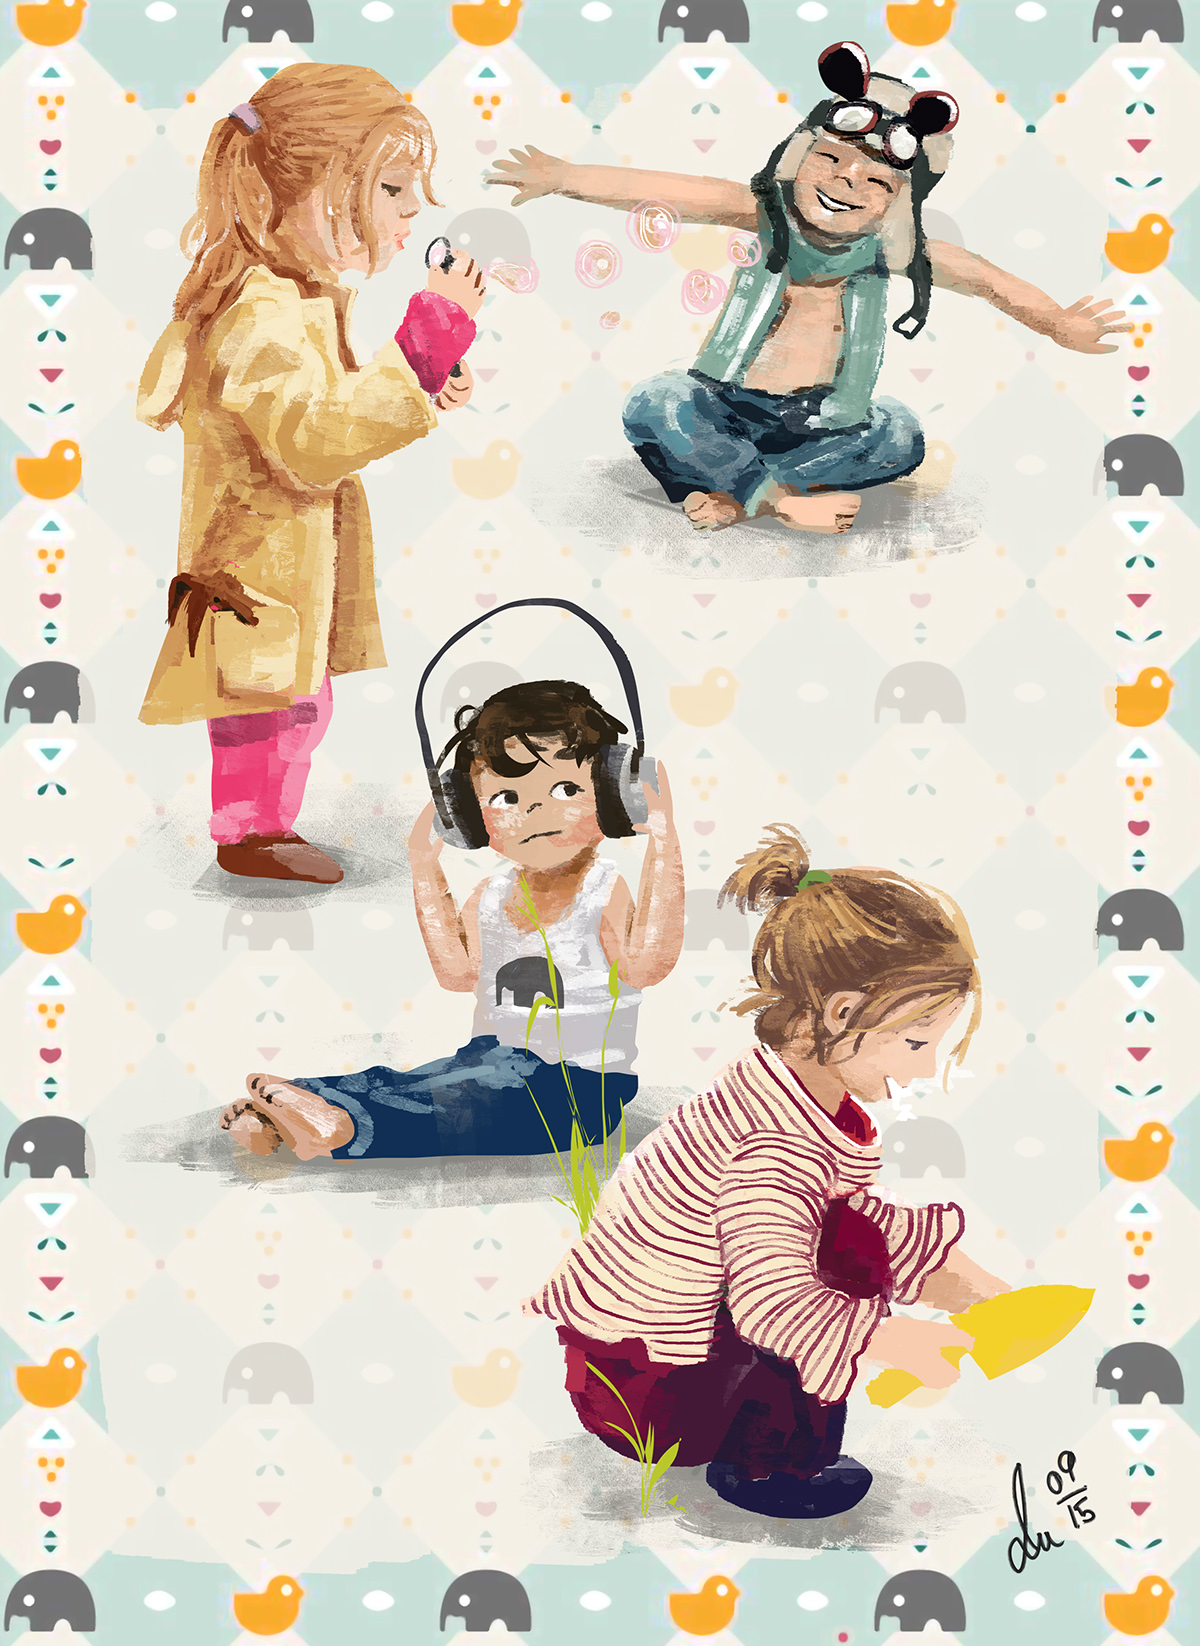 childrens playing Games Childslith Fun childrensbook